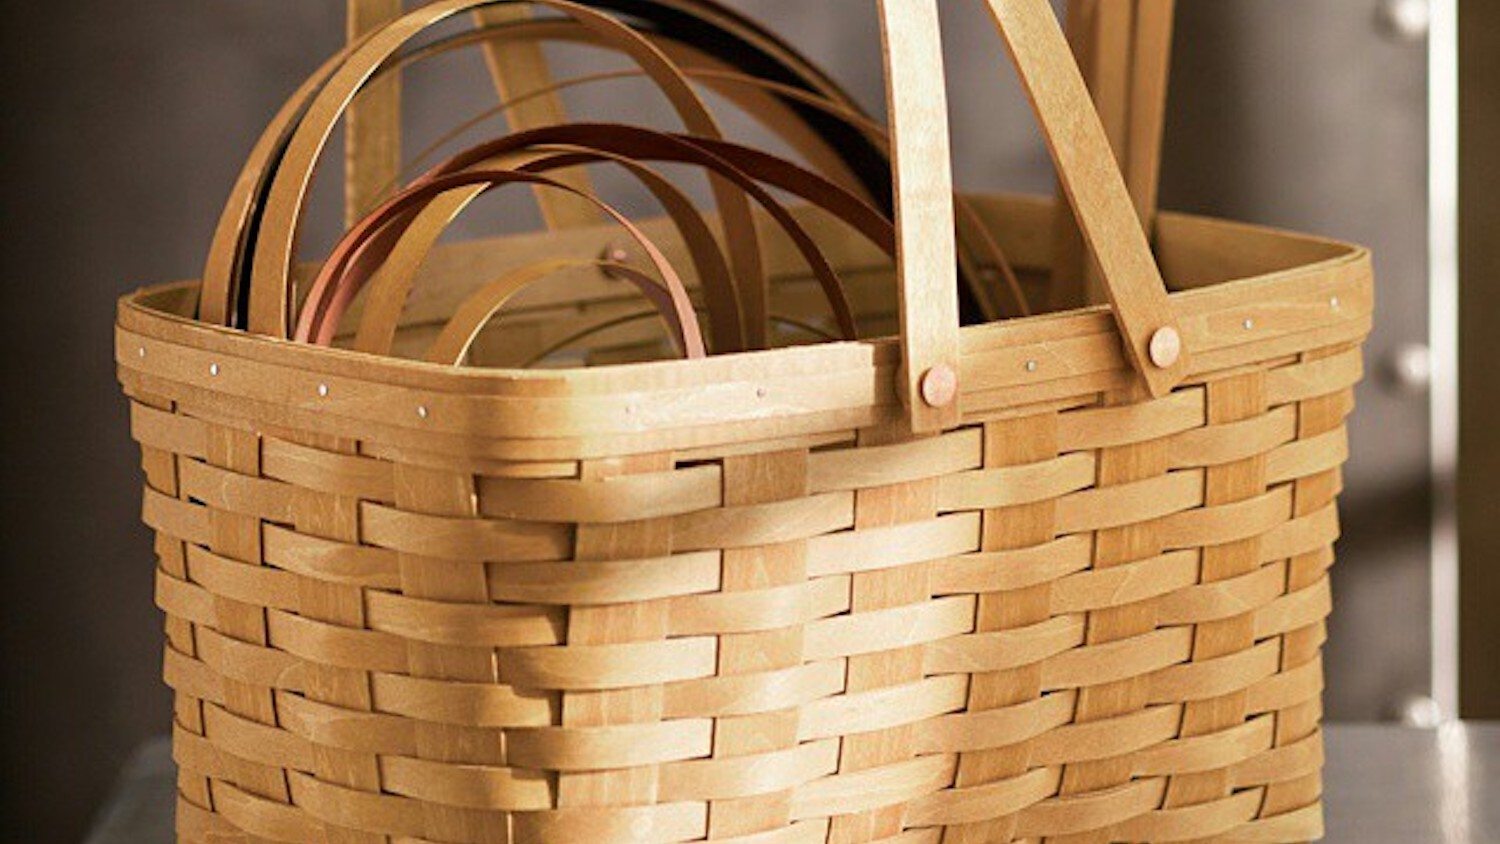 Longaberger basket company going out of business